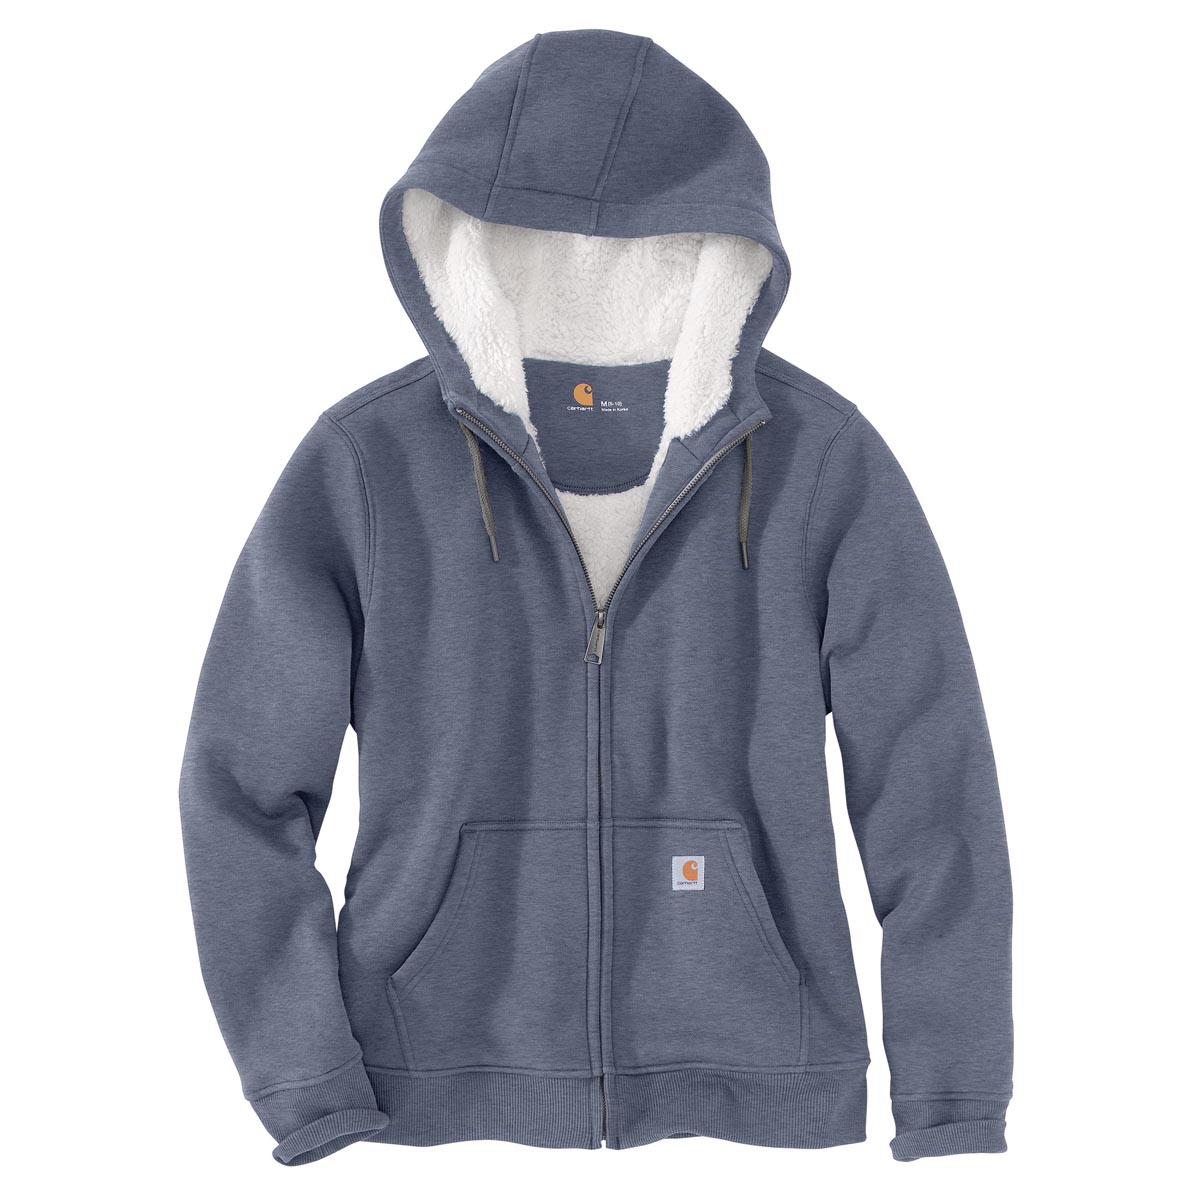 Carhartt Women's Clarksburg Sherpa Lined Hoodie - Discontinued Pricing